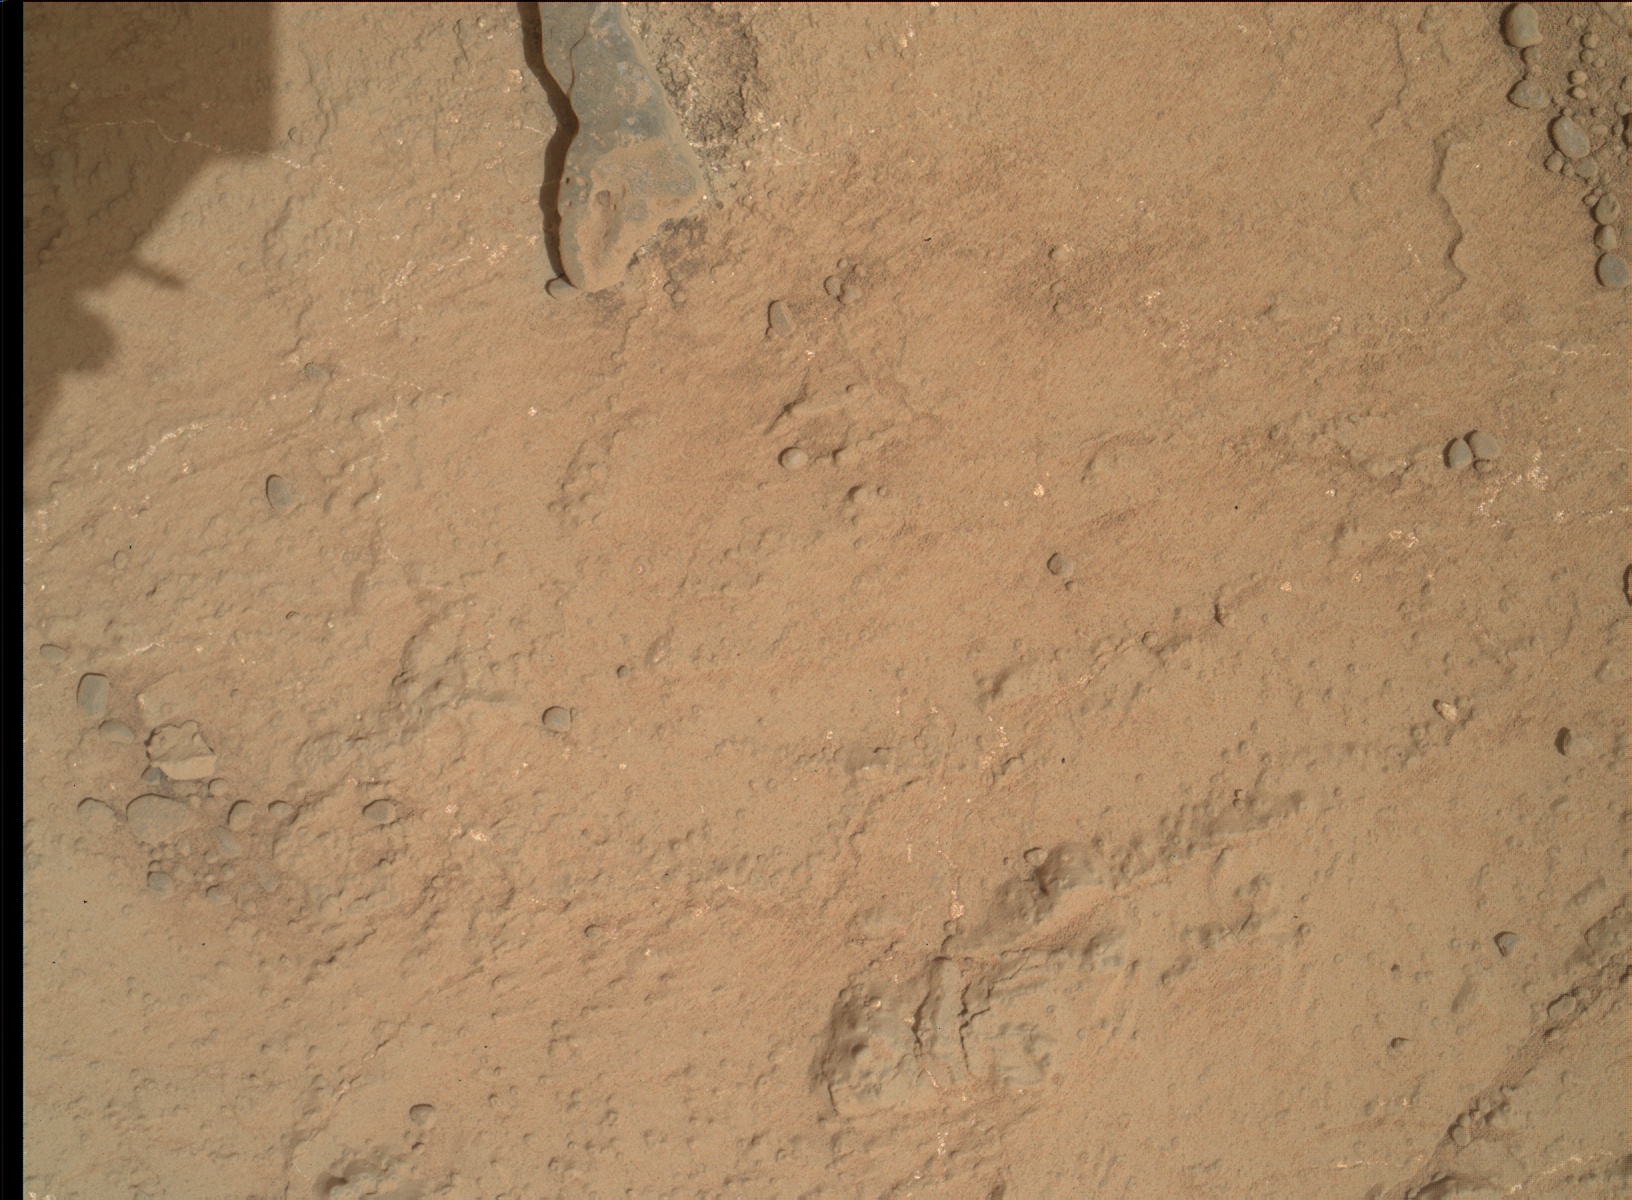 Nasa's Mars rover Curiosity acquired this image using its Mars Hand Lens Imager (MAHLI) on Sol 170